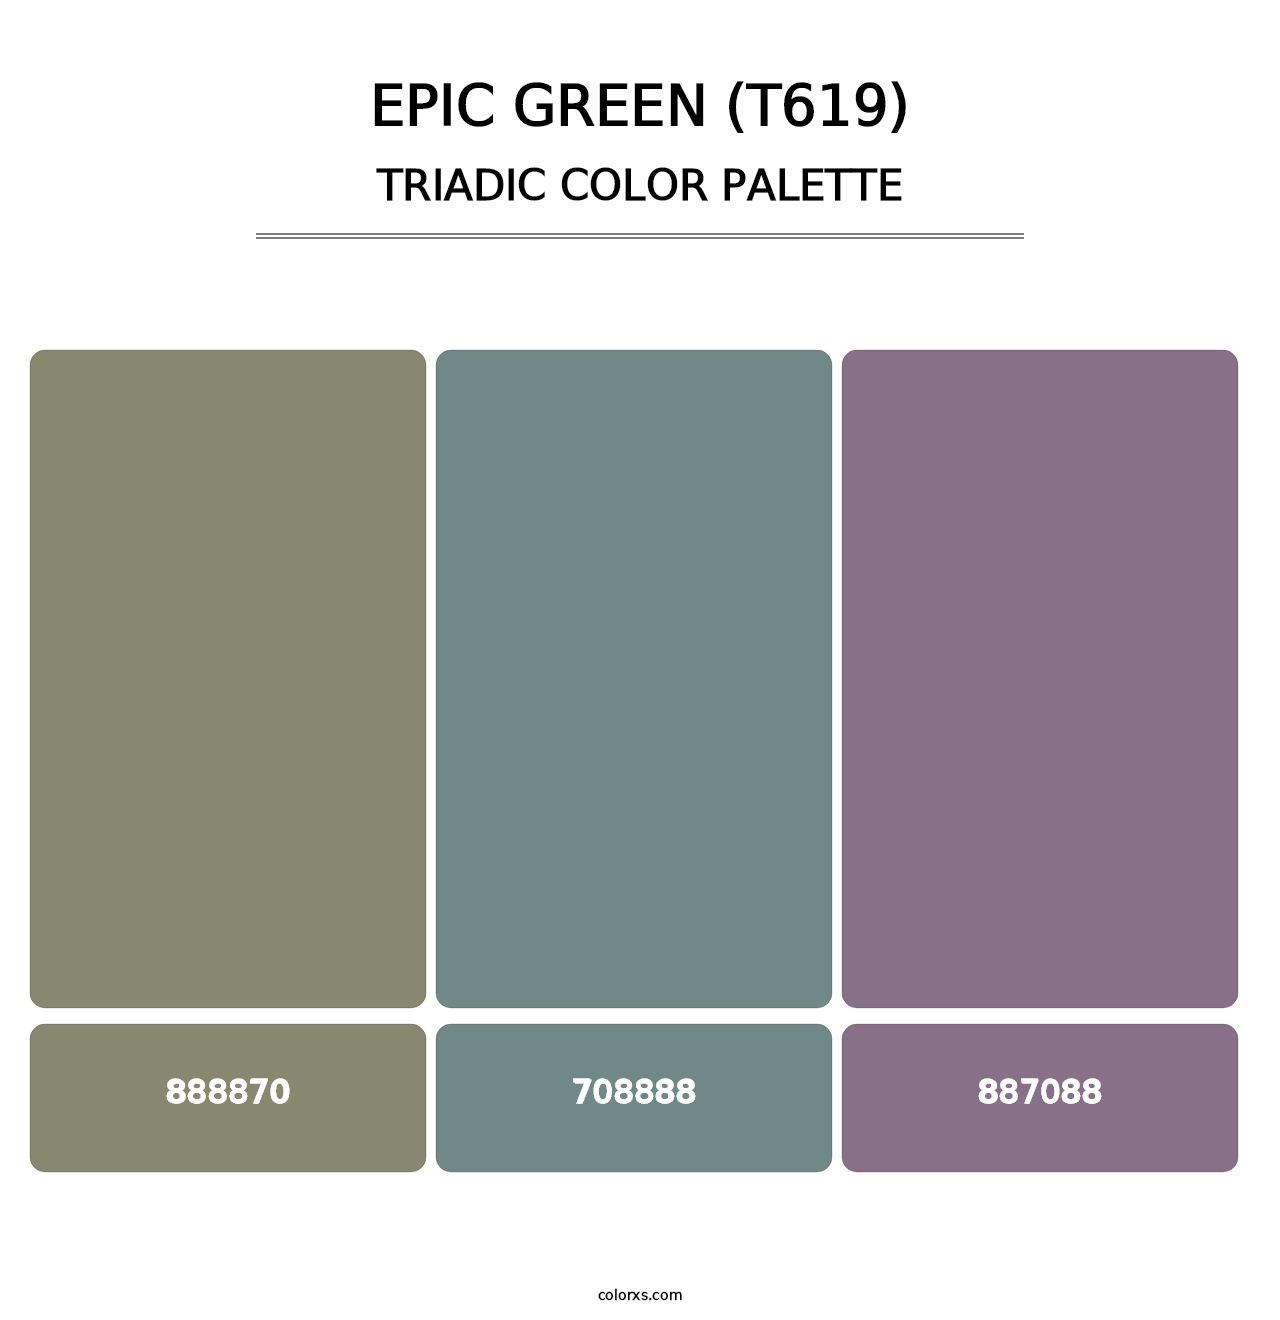 Epic Green (T619) - Triadic Color Palette